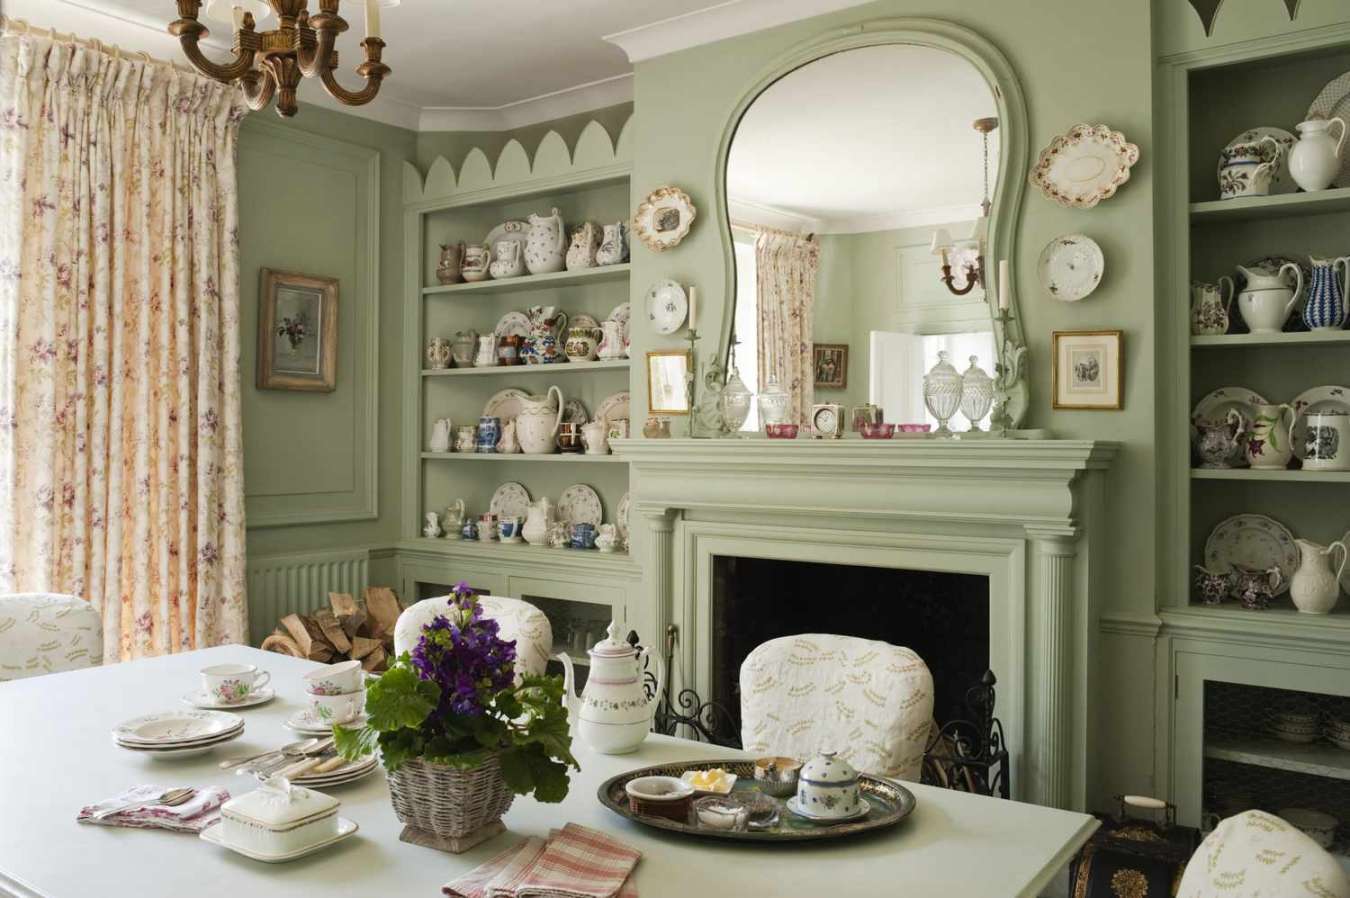 Dining Room Paint Colors Worthy of Your Happiest Dinner Occasions